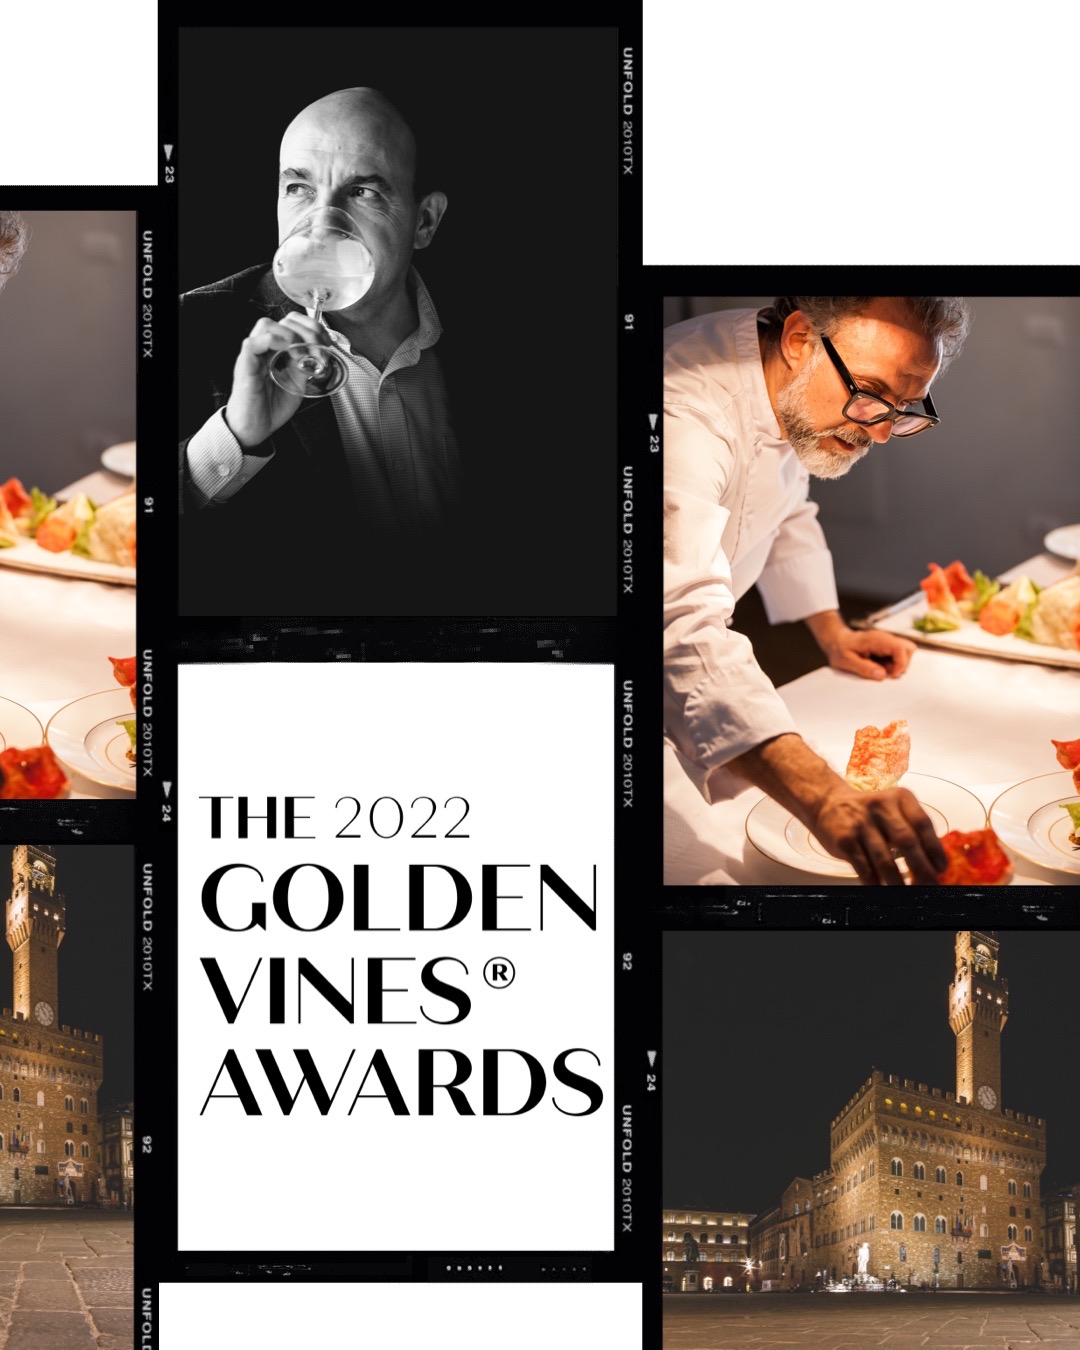 The 2022 Golden Vines® Awards Will Be Held October 15 17 In Florence Liz Palmer